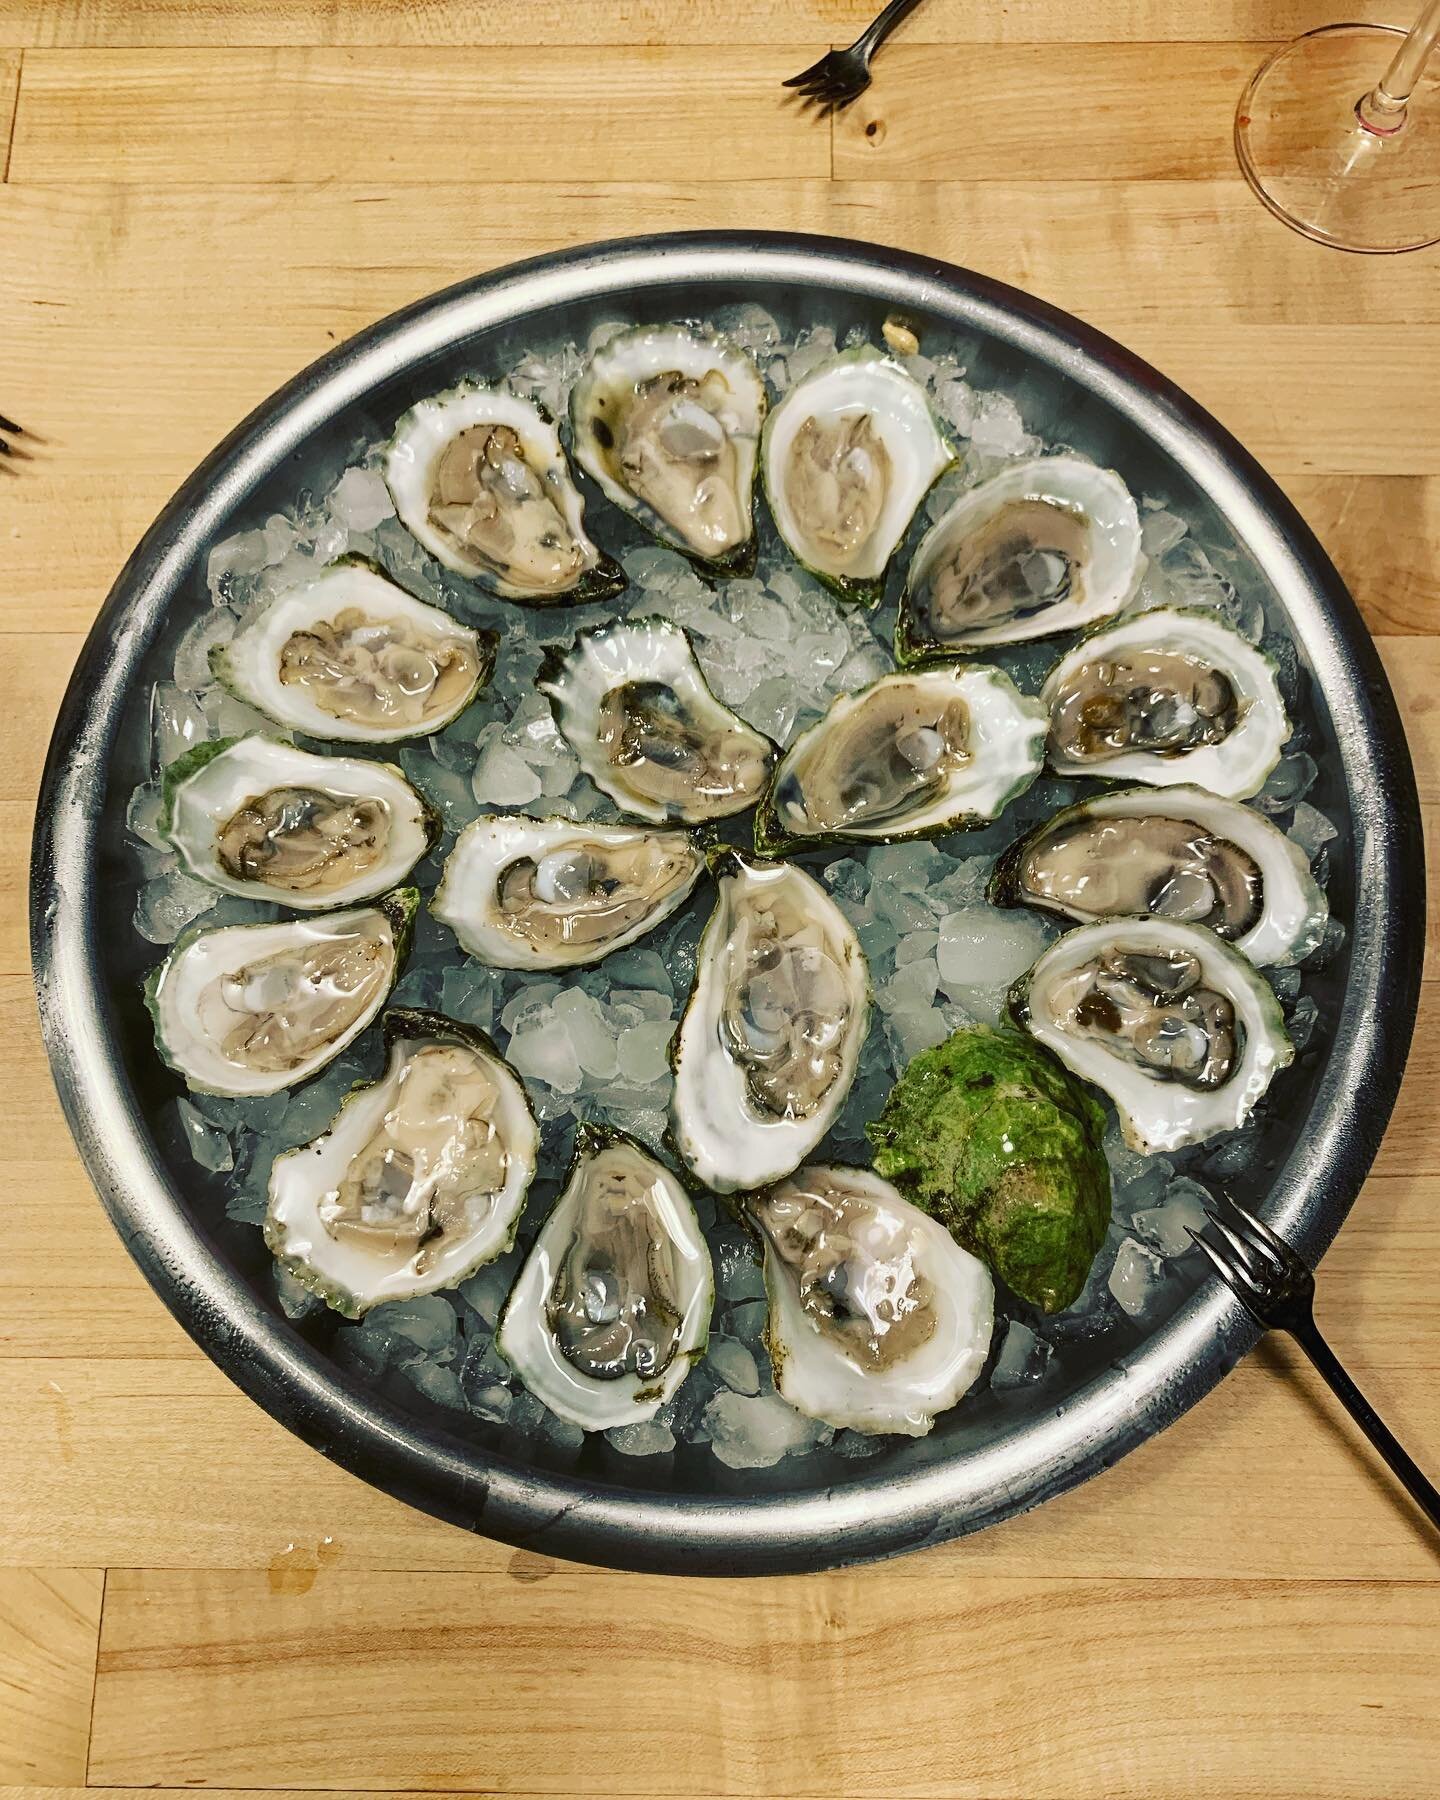 Laying down the gauntlet with some lovely North Haven oysters from Maine. The green shells are almost as beautiful as the bivalves are tasty. It won&rsquo;t take long to taste and turn all these shells